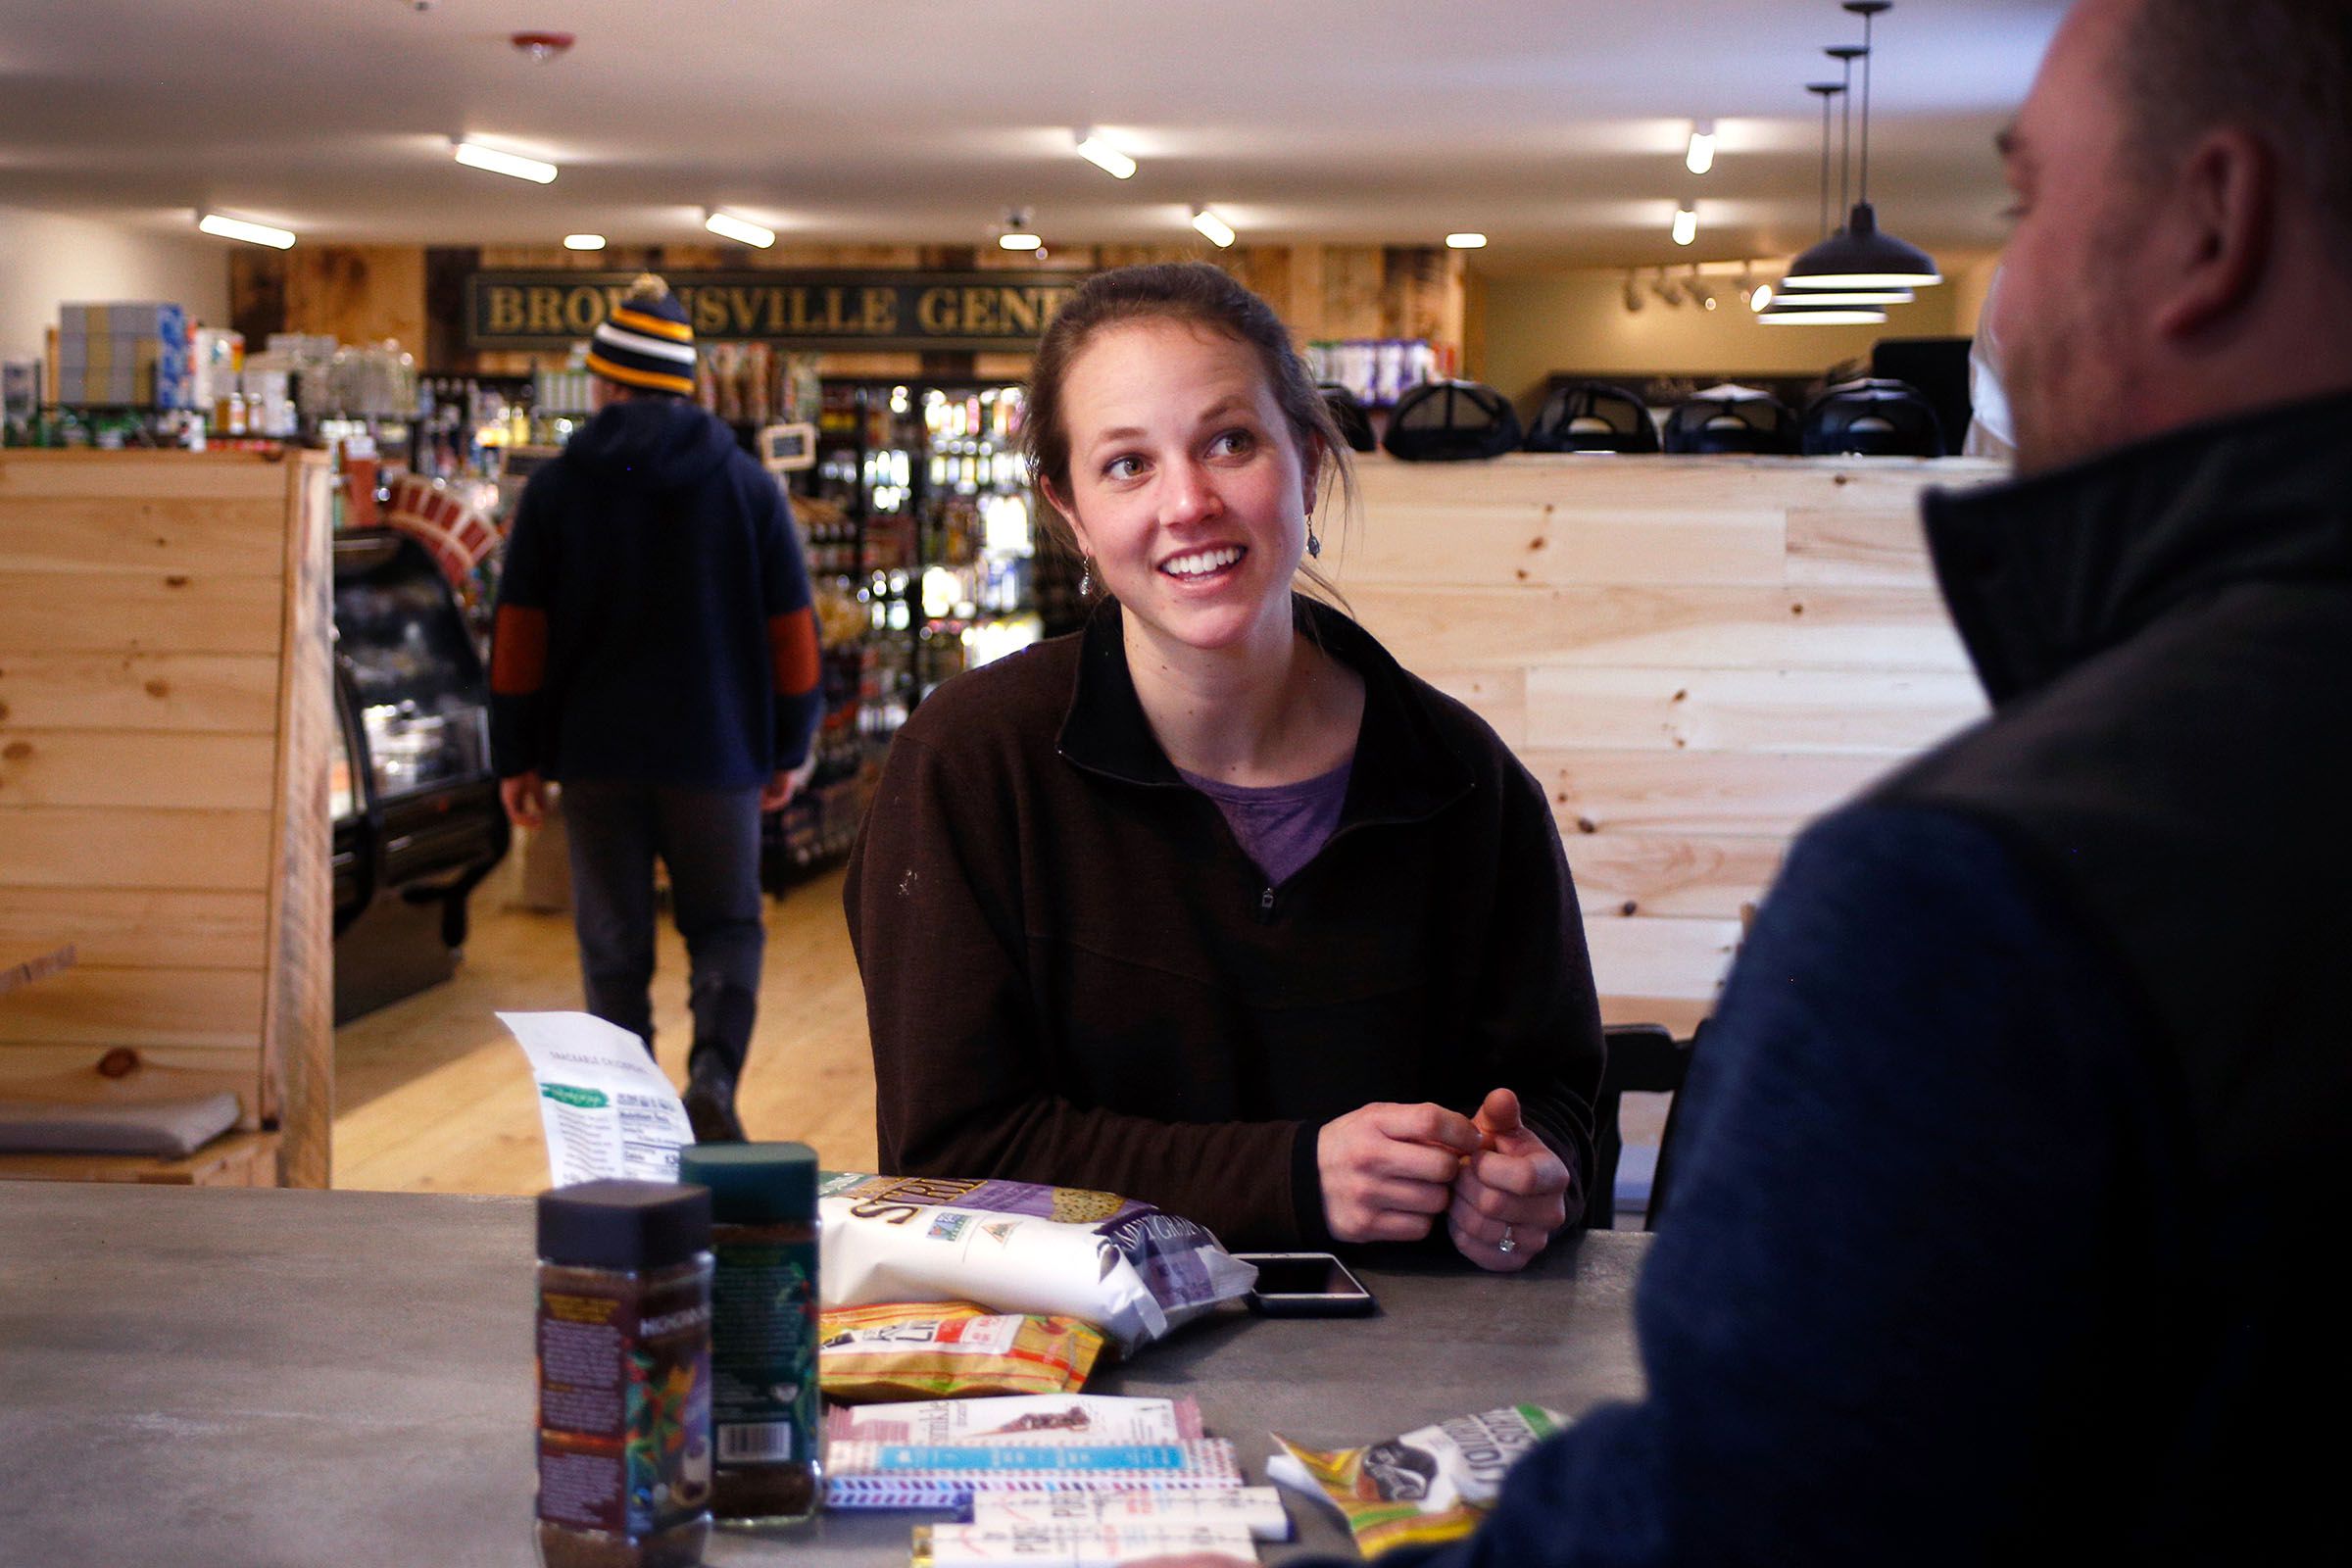 Co-owner Lauren Stevens talks with a distributor about new products for the store at the Brownsville Butcher & Pantry in Brownsville, Vt., on Jan. 17, 2019. (Valley News - Joseph Ressler) Copyright Valley News. May not be reprinted or used online without permission. Send requests to permission@vnews.com.